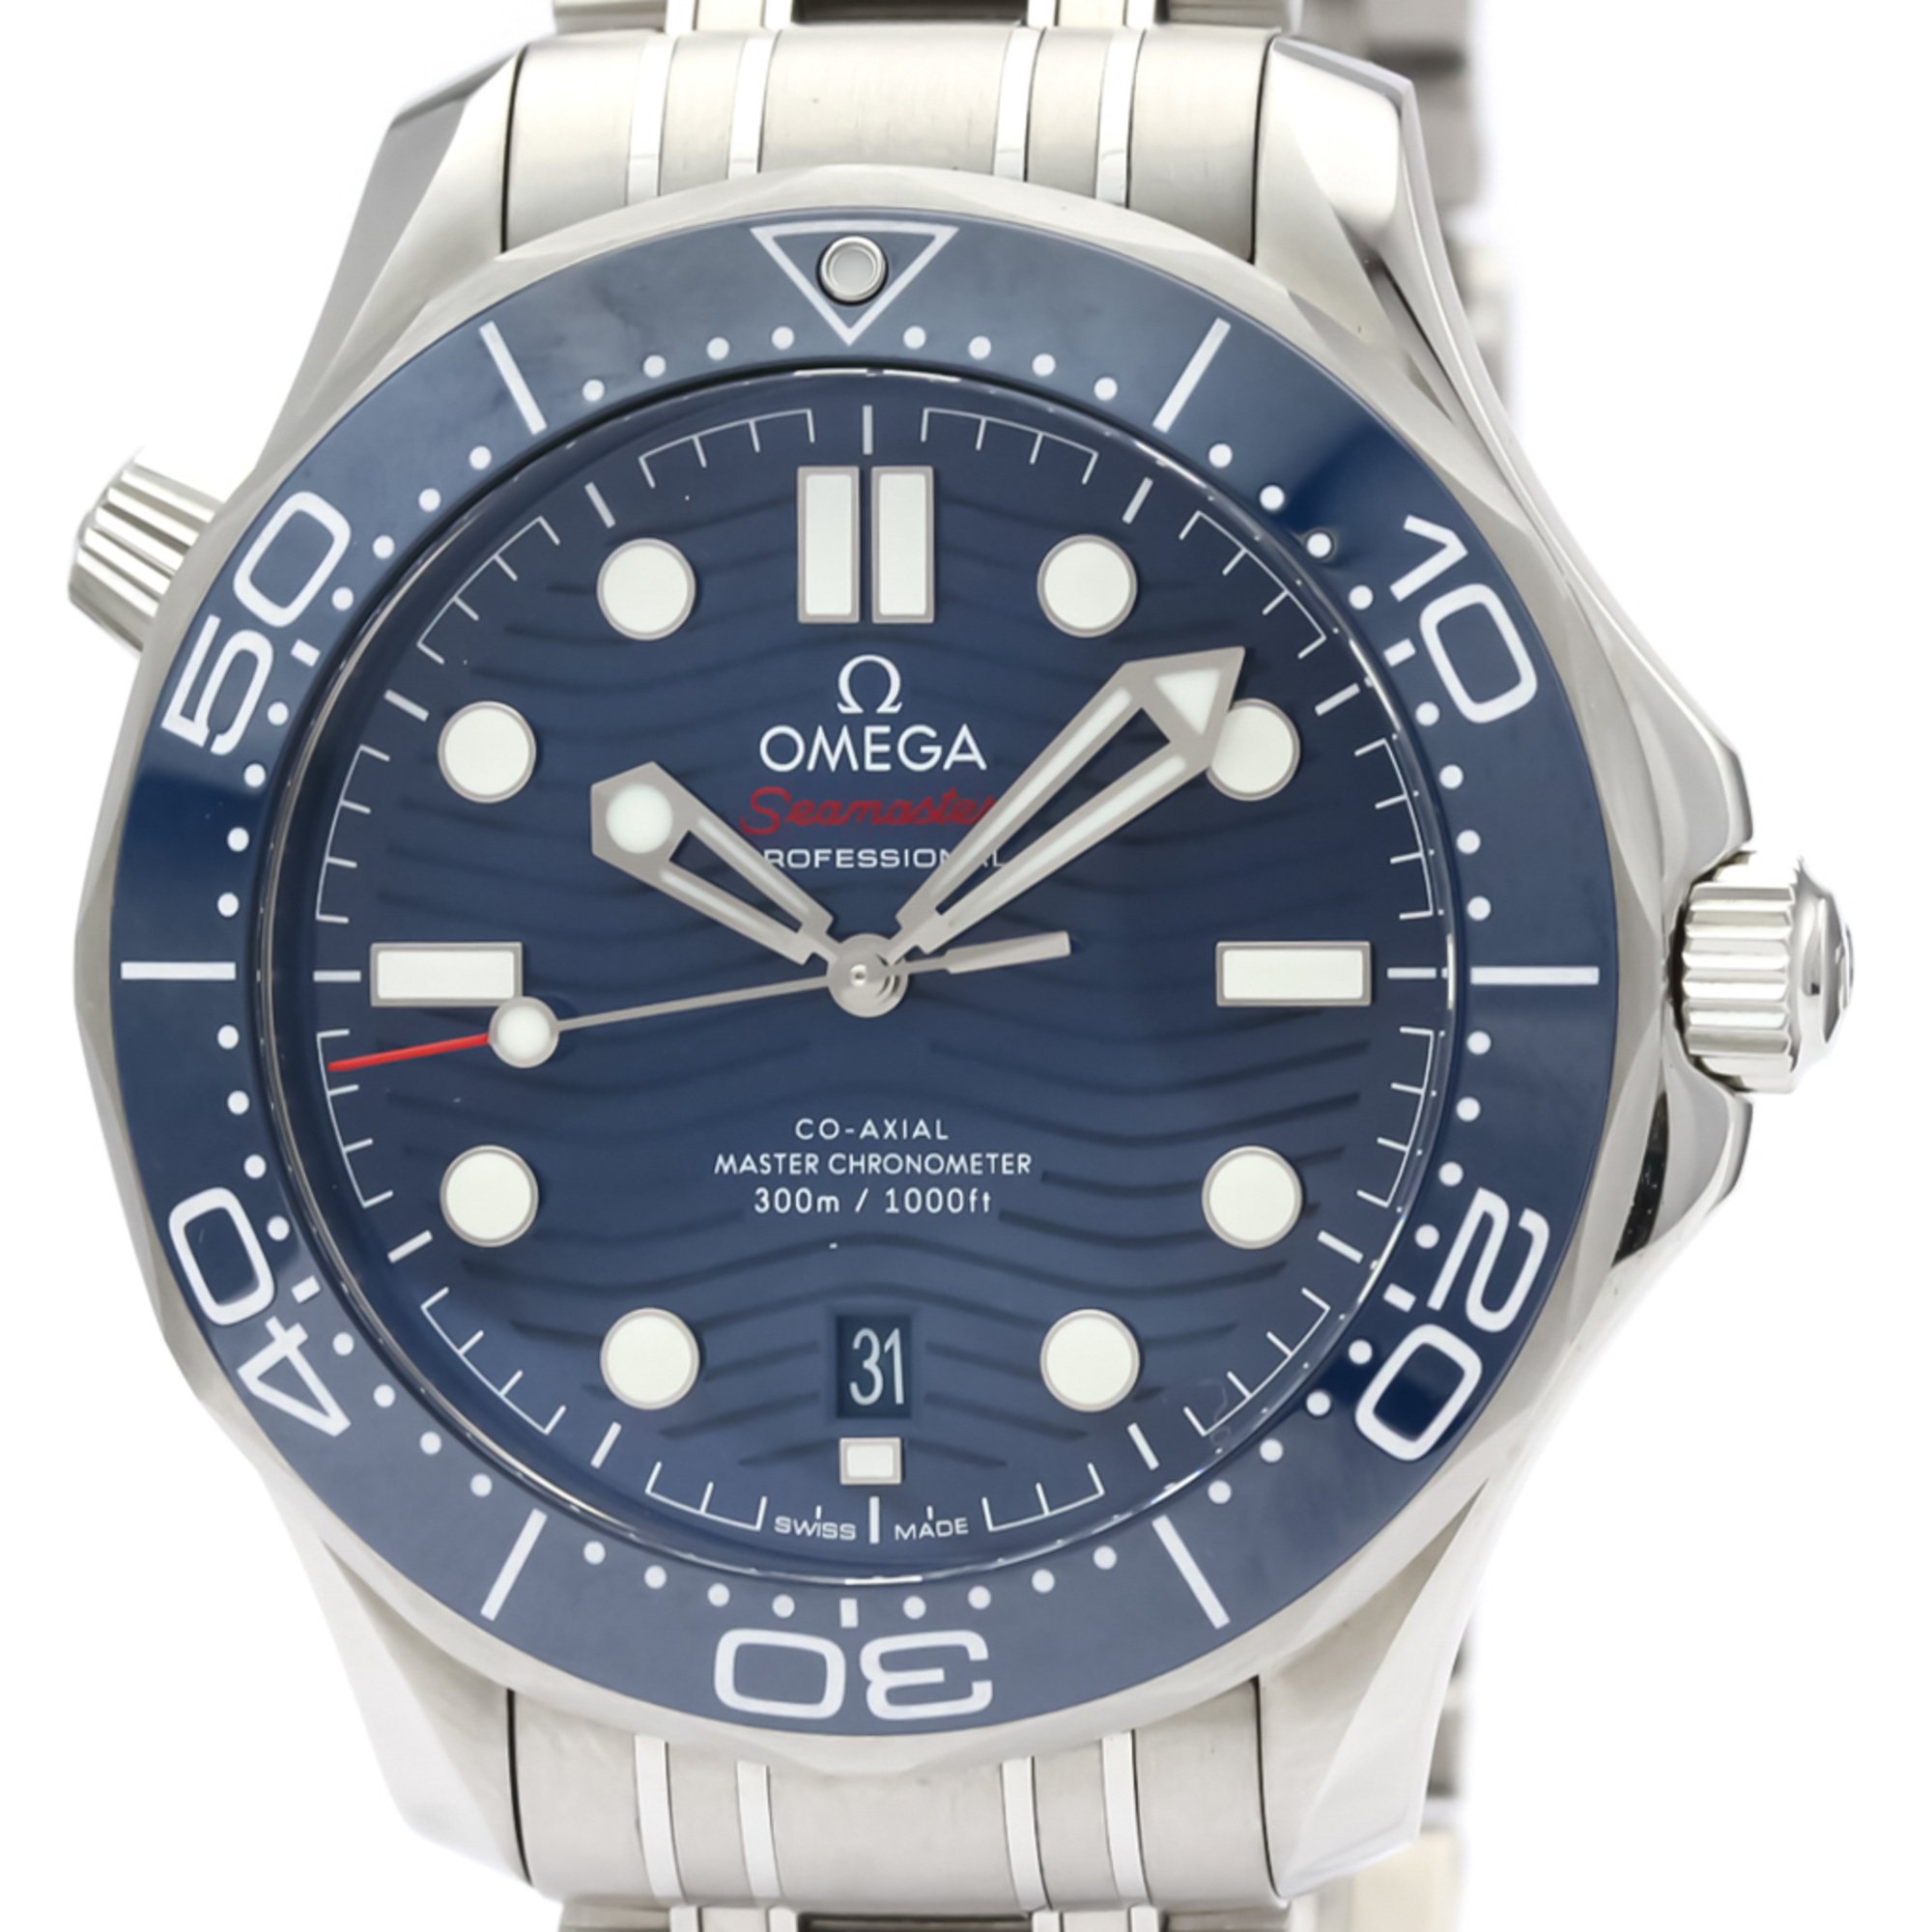 Omega Seamaster Automatic Ceramic,Stainless Steel Men's Sports Watch 210.30.42.20.03.001